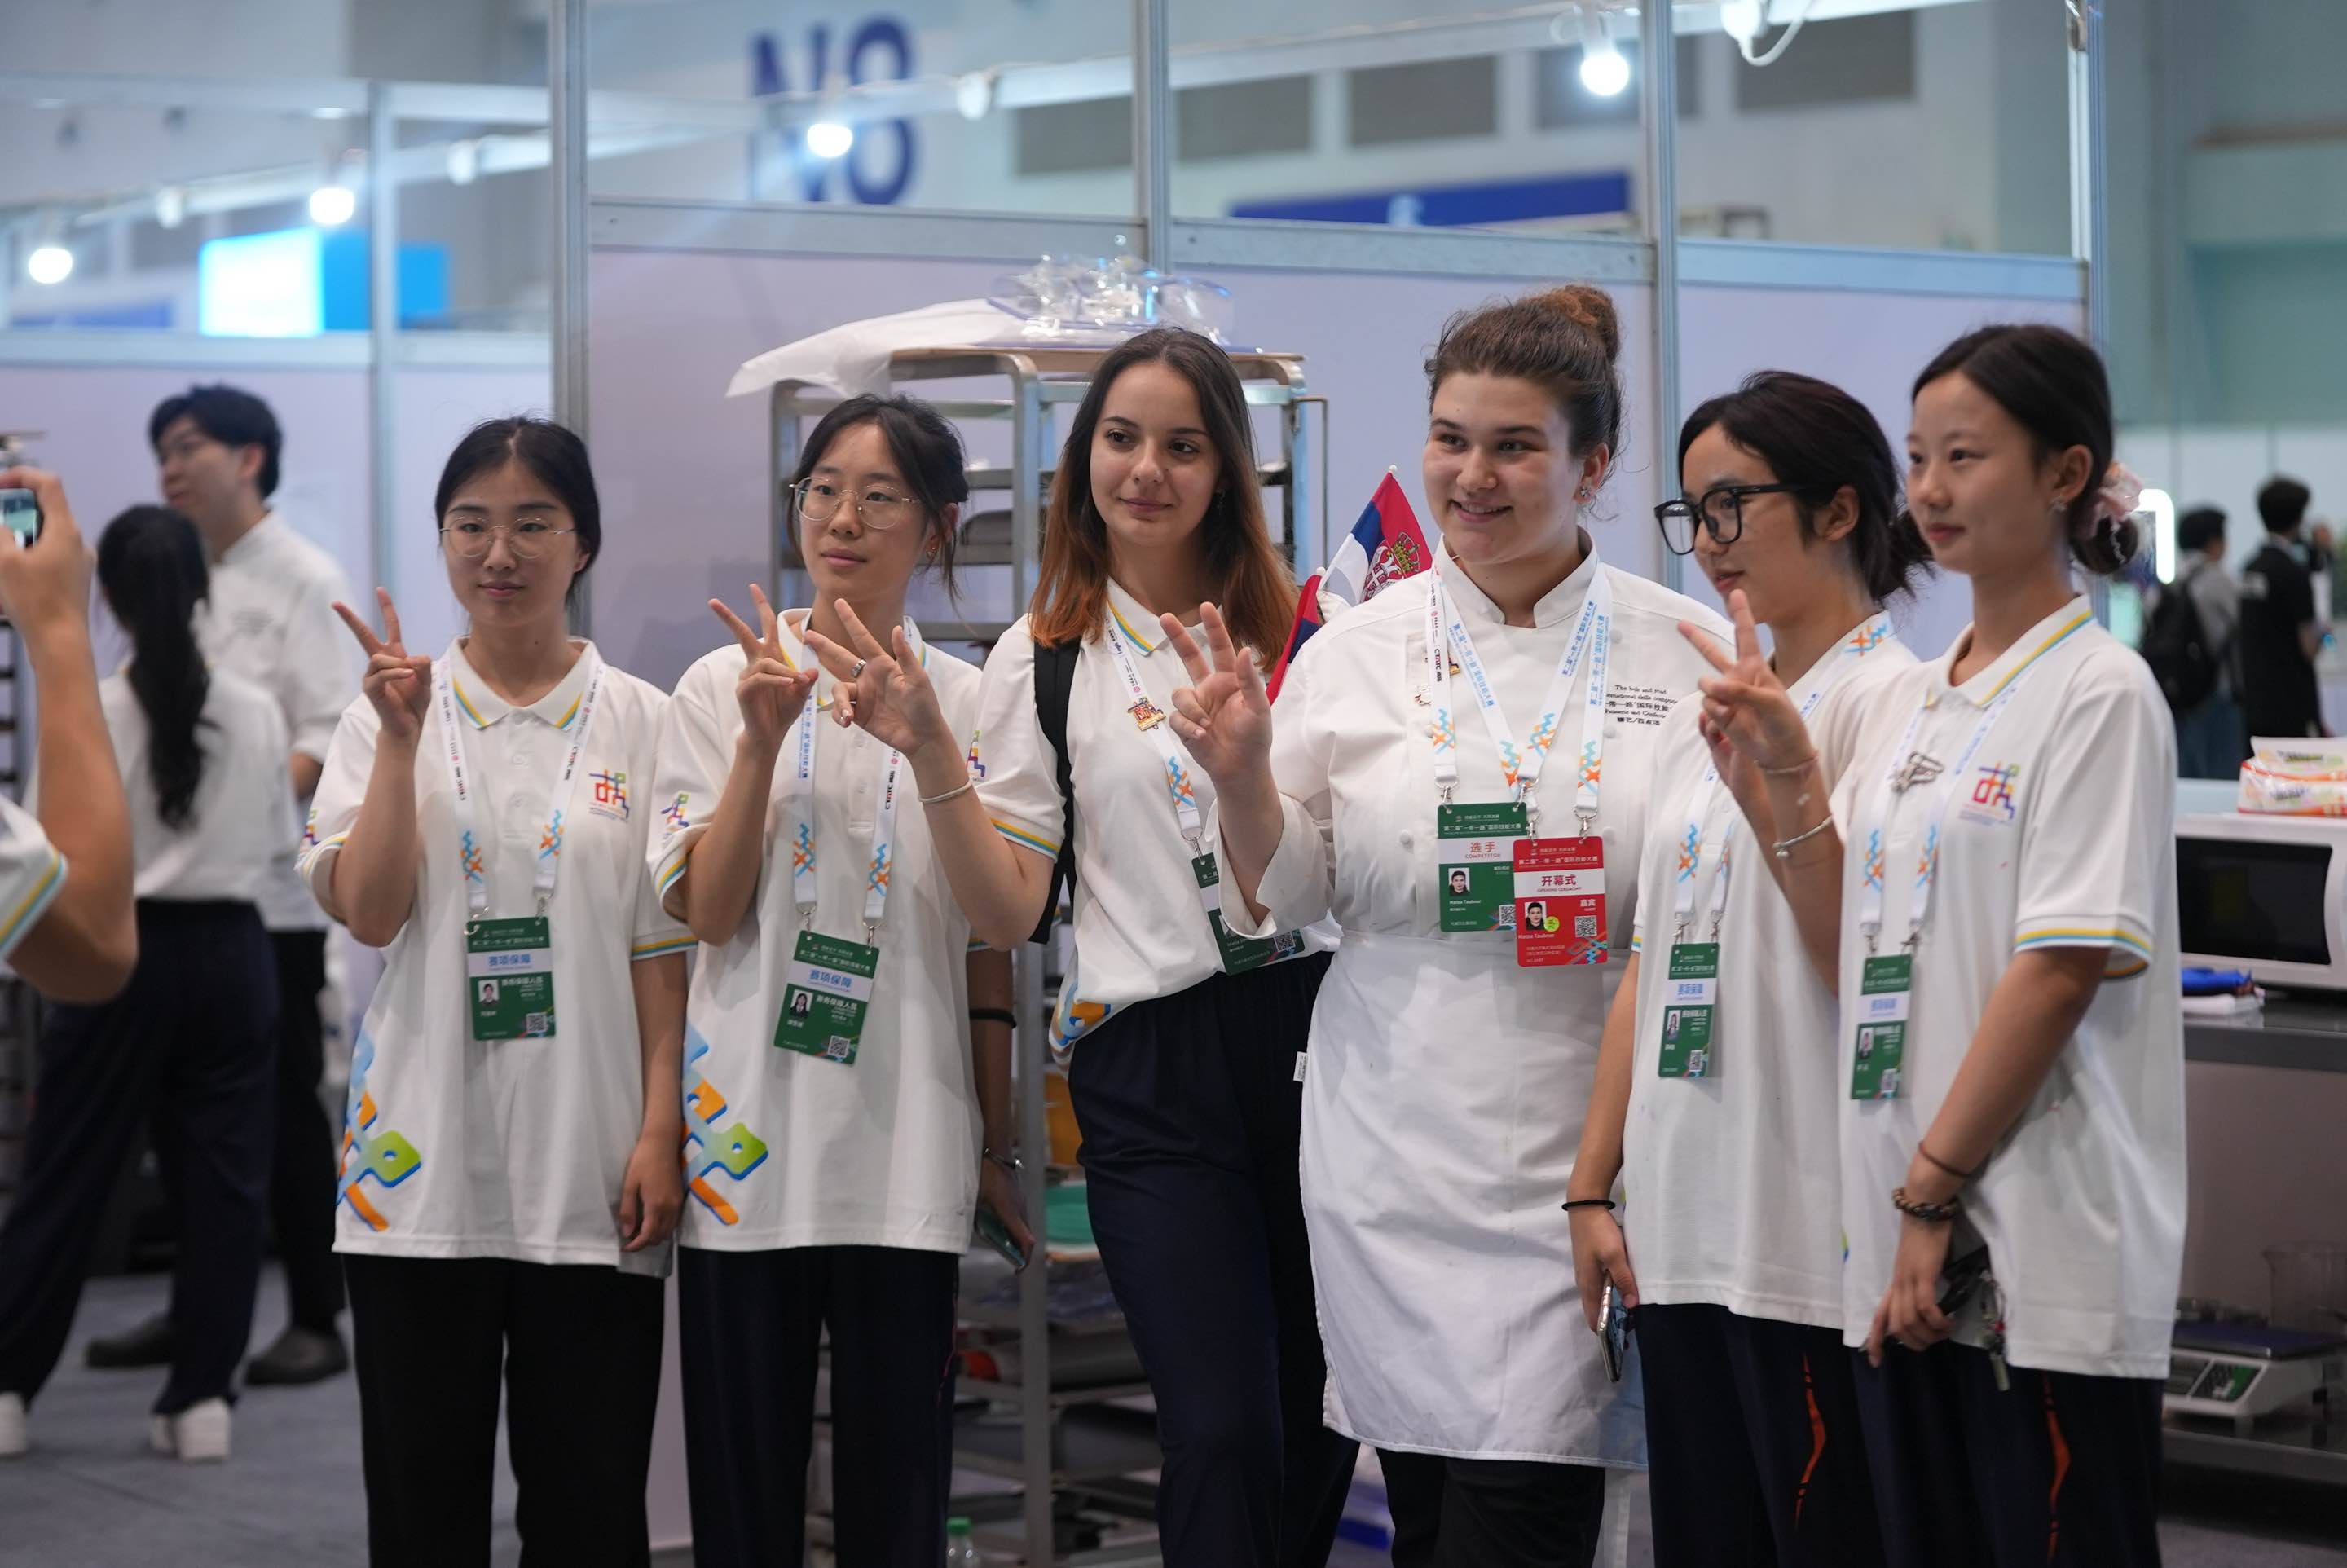 Participants bid farewell to Chongqing as 2nd Belt and Road International Skills Competition concludes